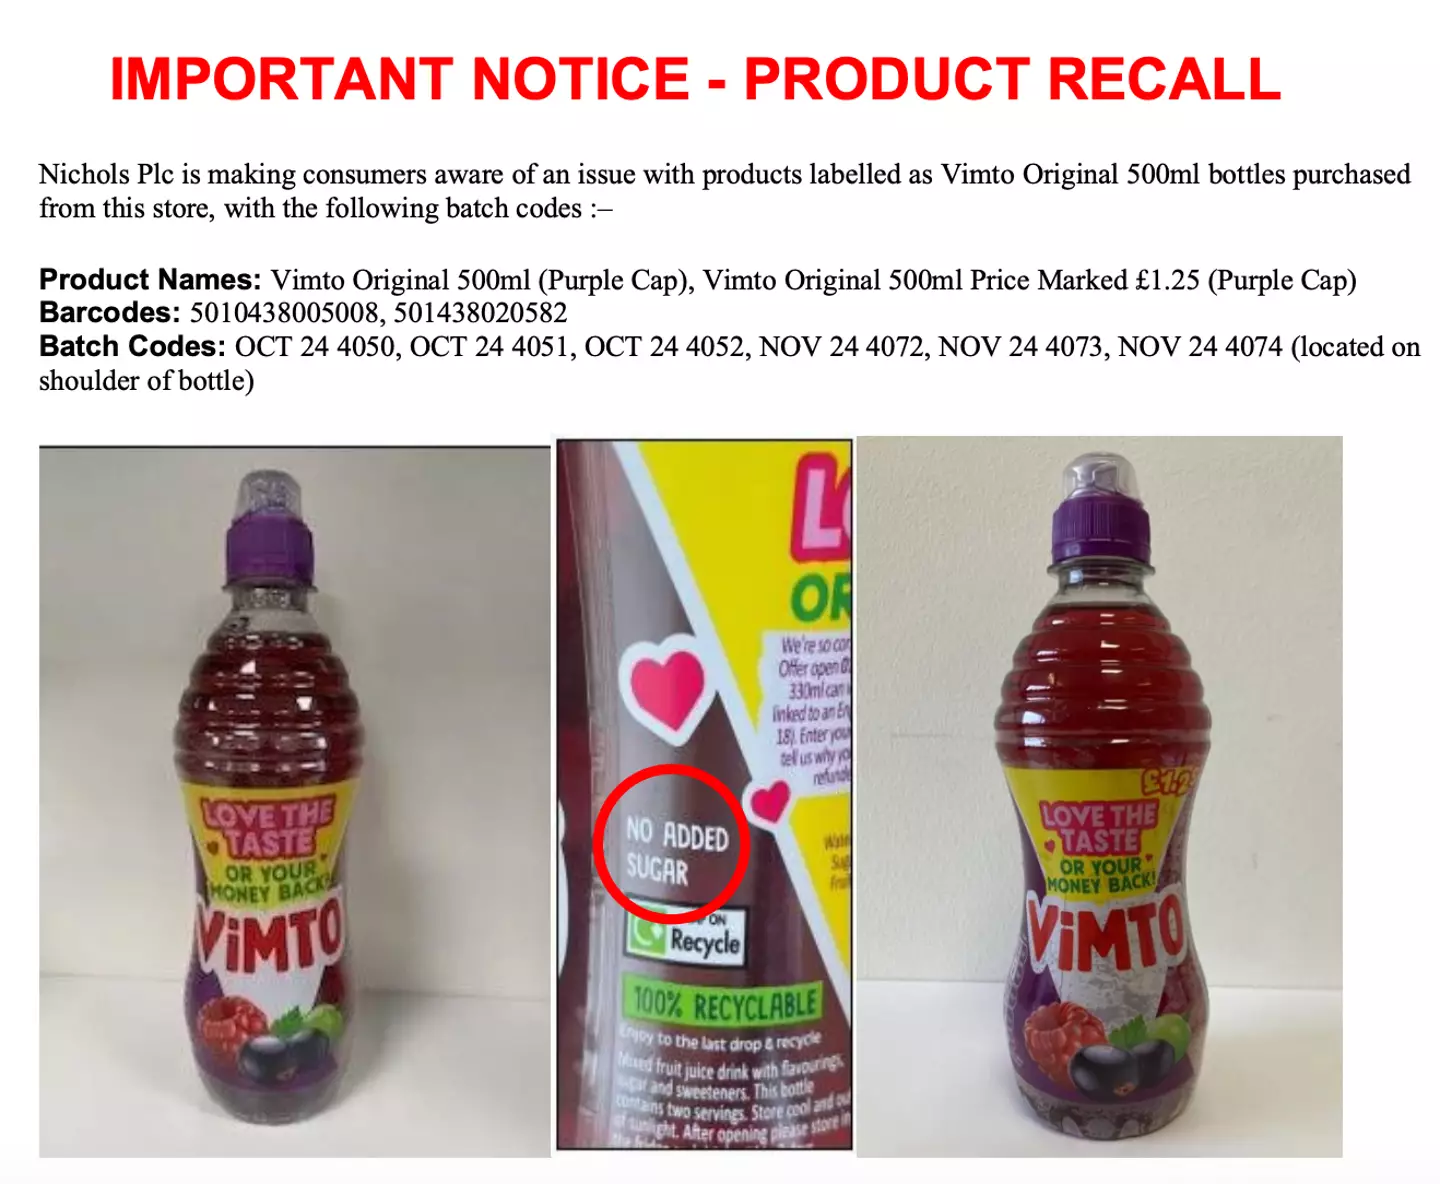 Vimto has issued a product recall over certain bottles.